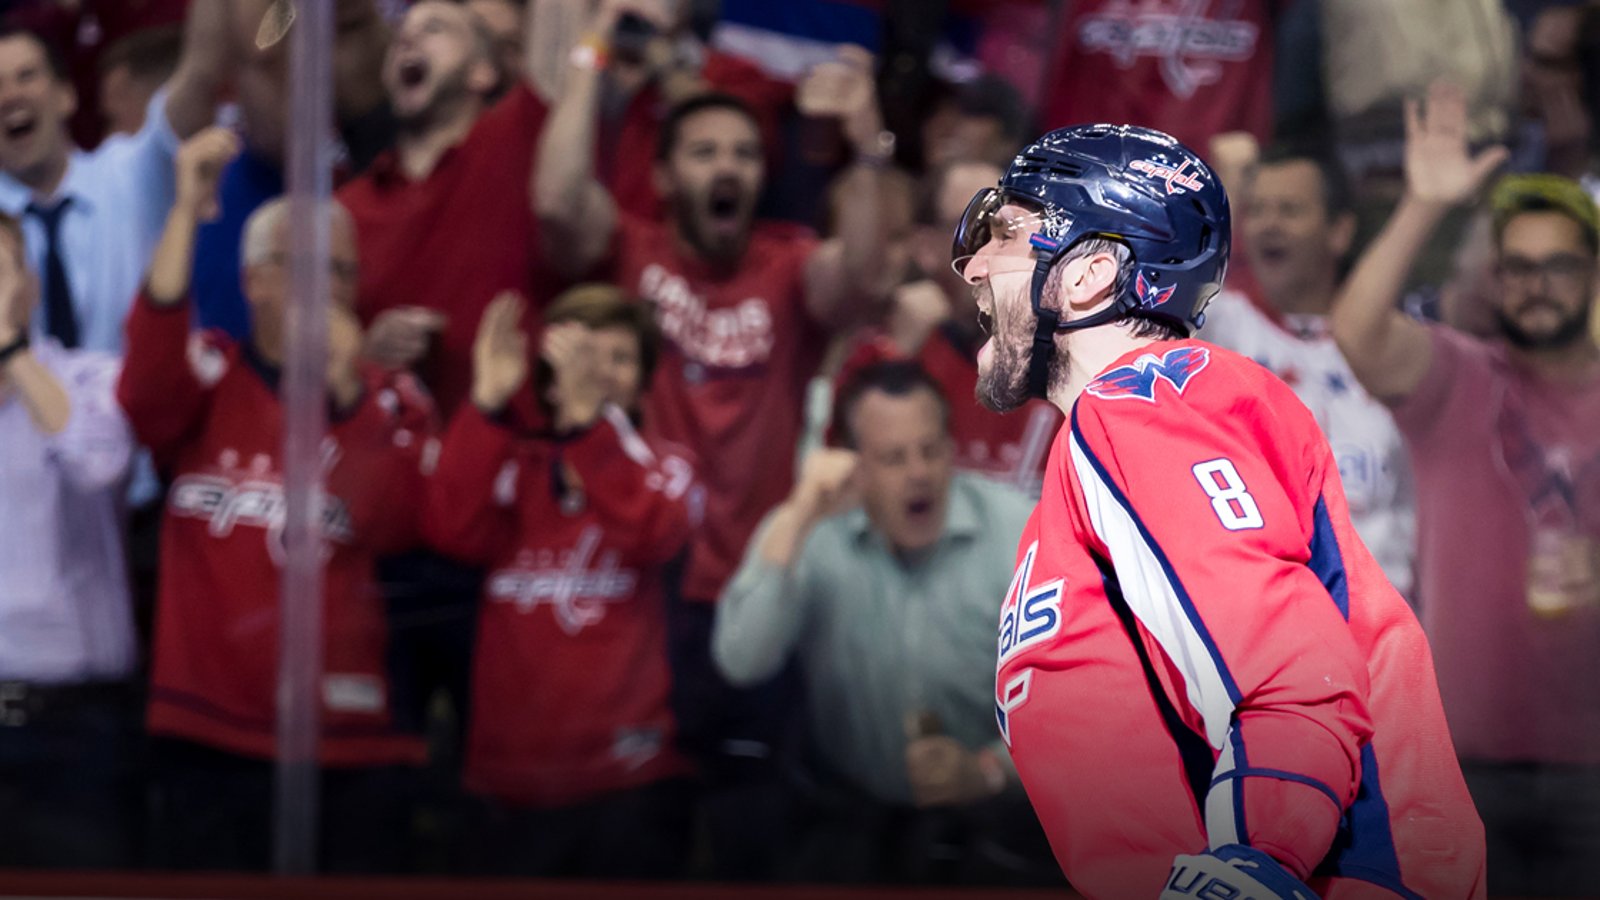 Ovechkin matches an insane record